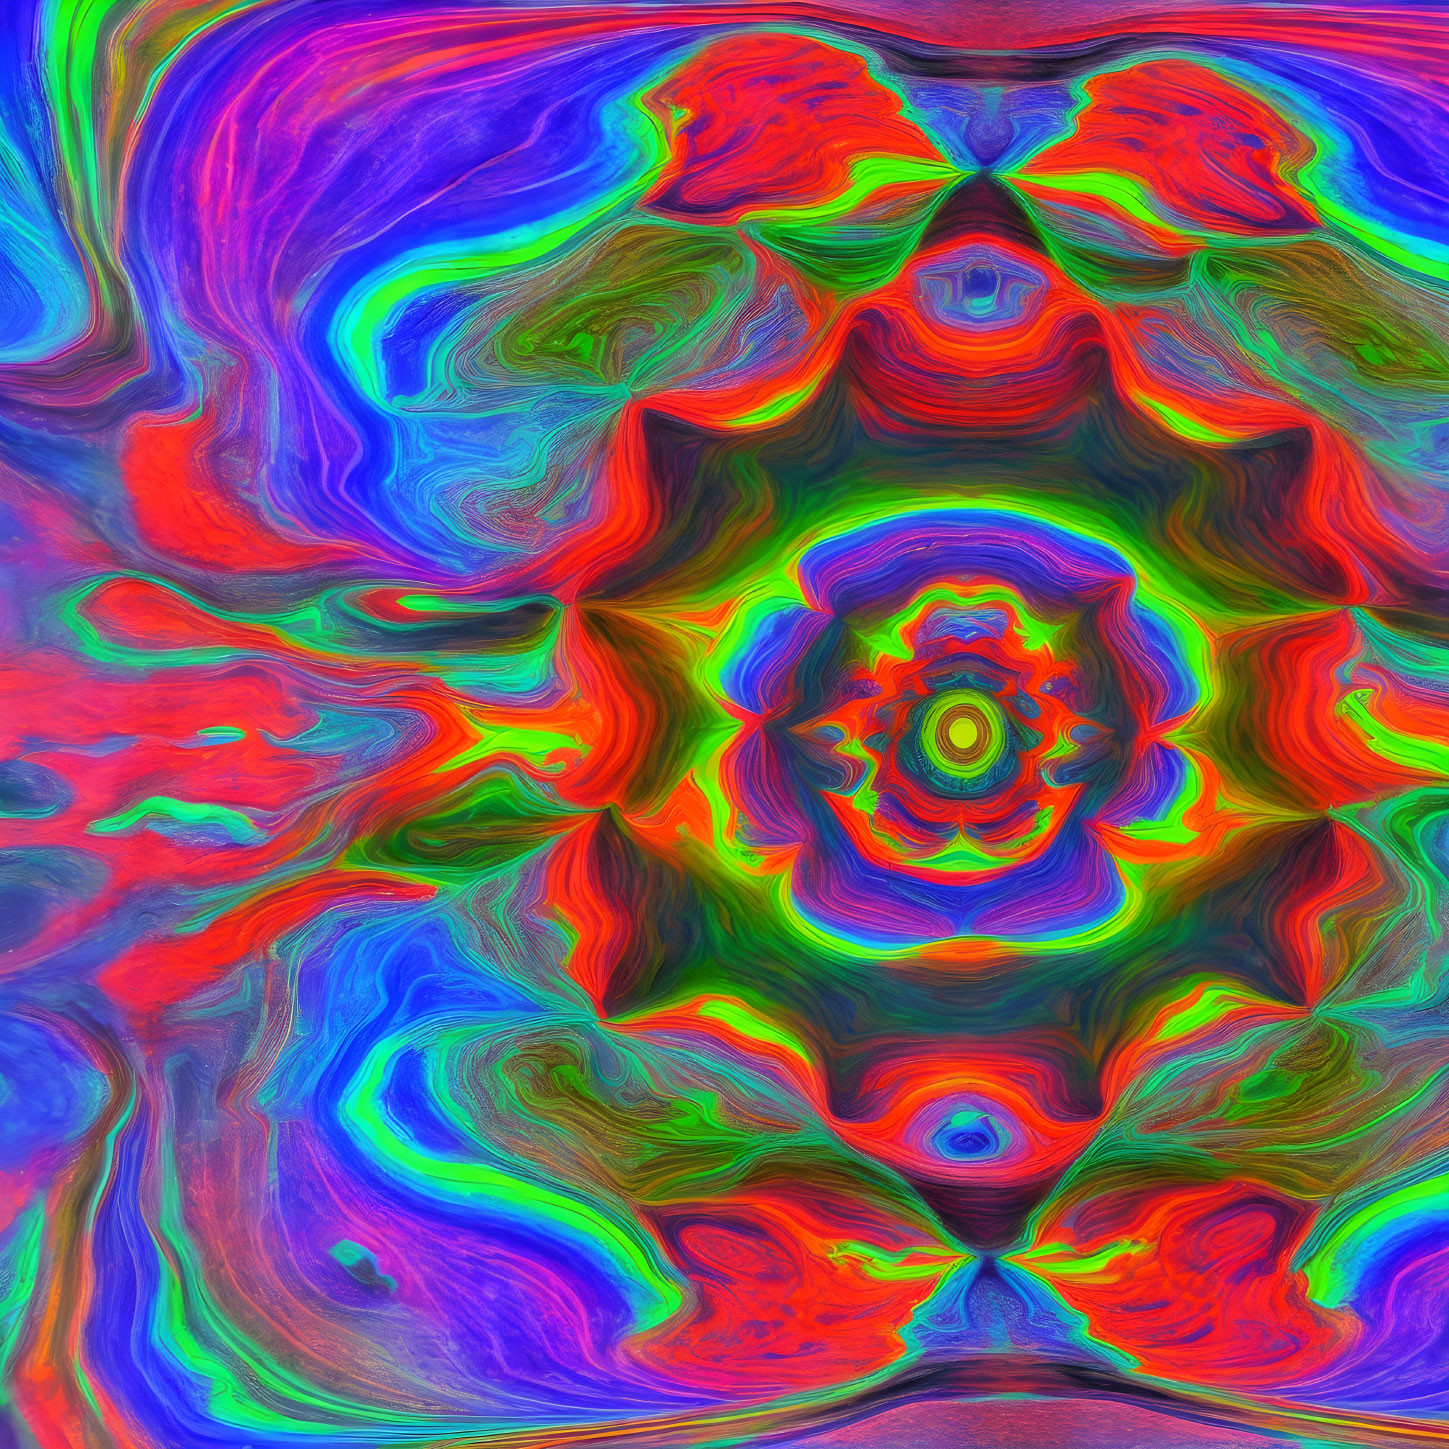 Colorful Swirling Abstract Digital Art: Blue, Red, Green & Purple